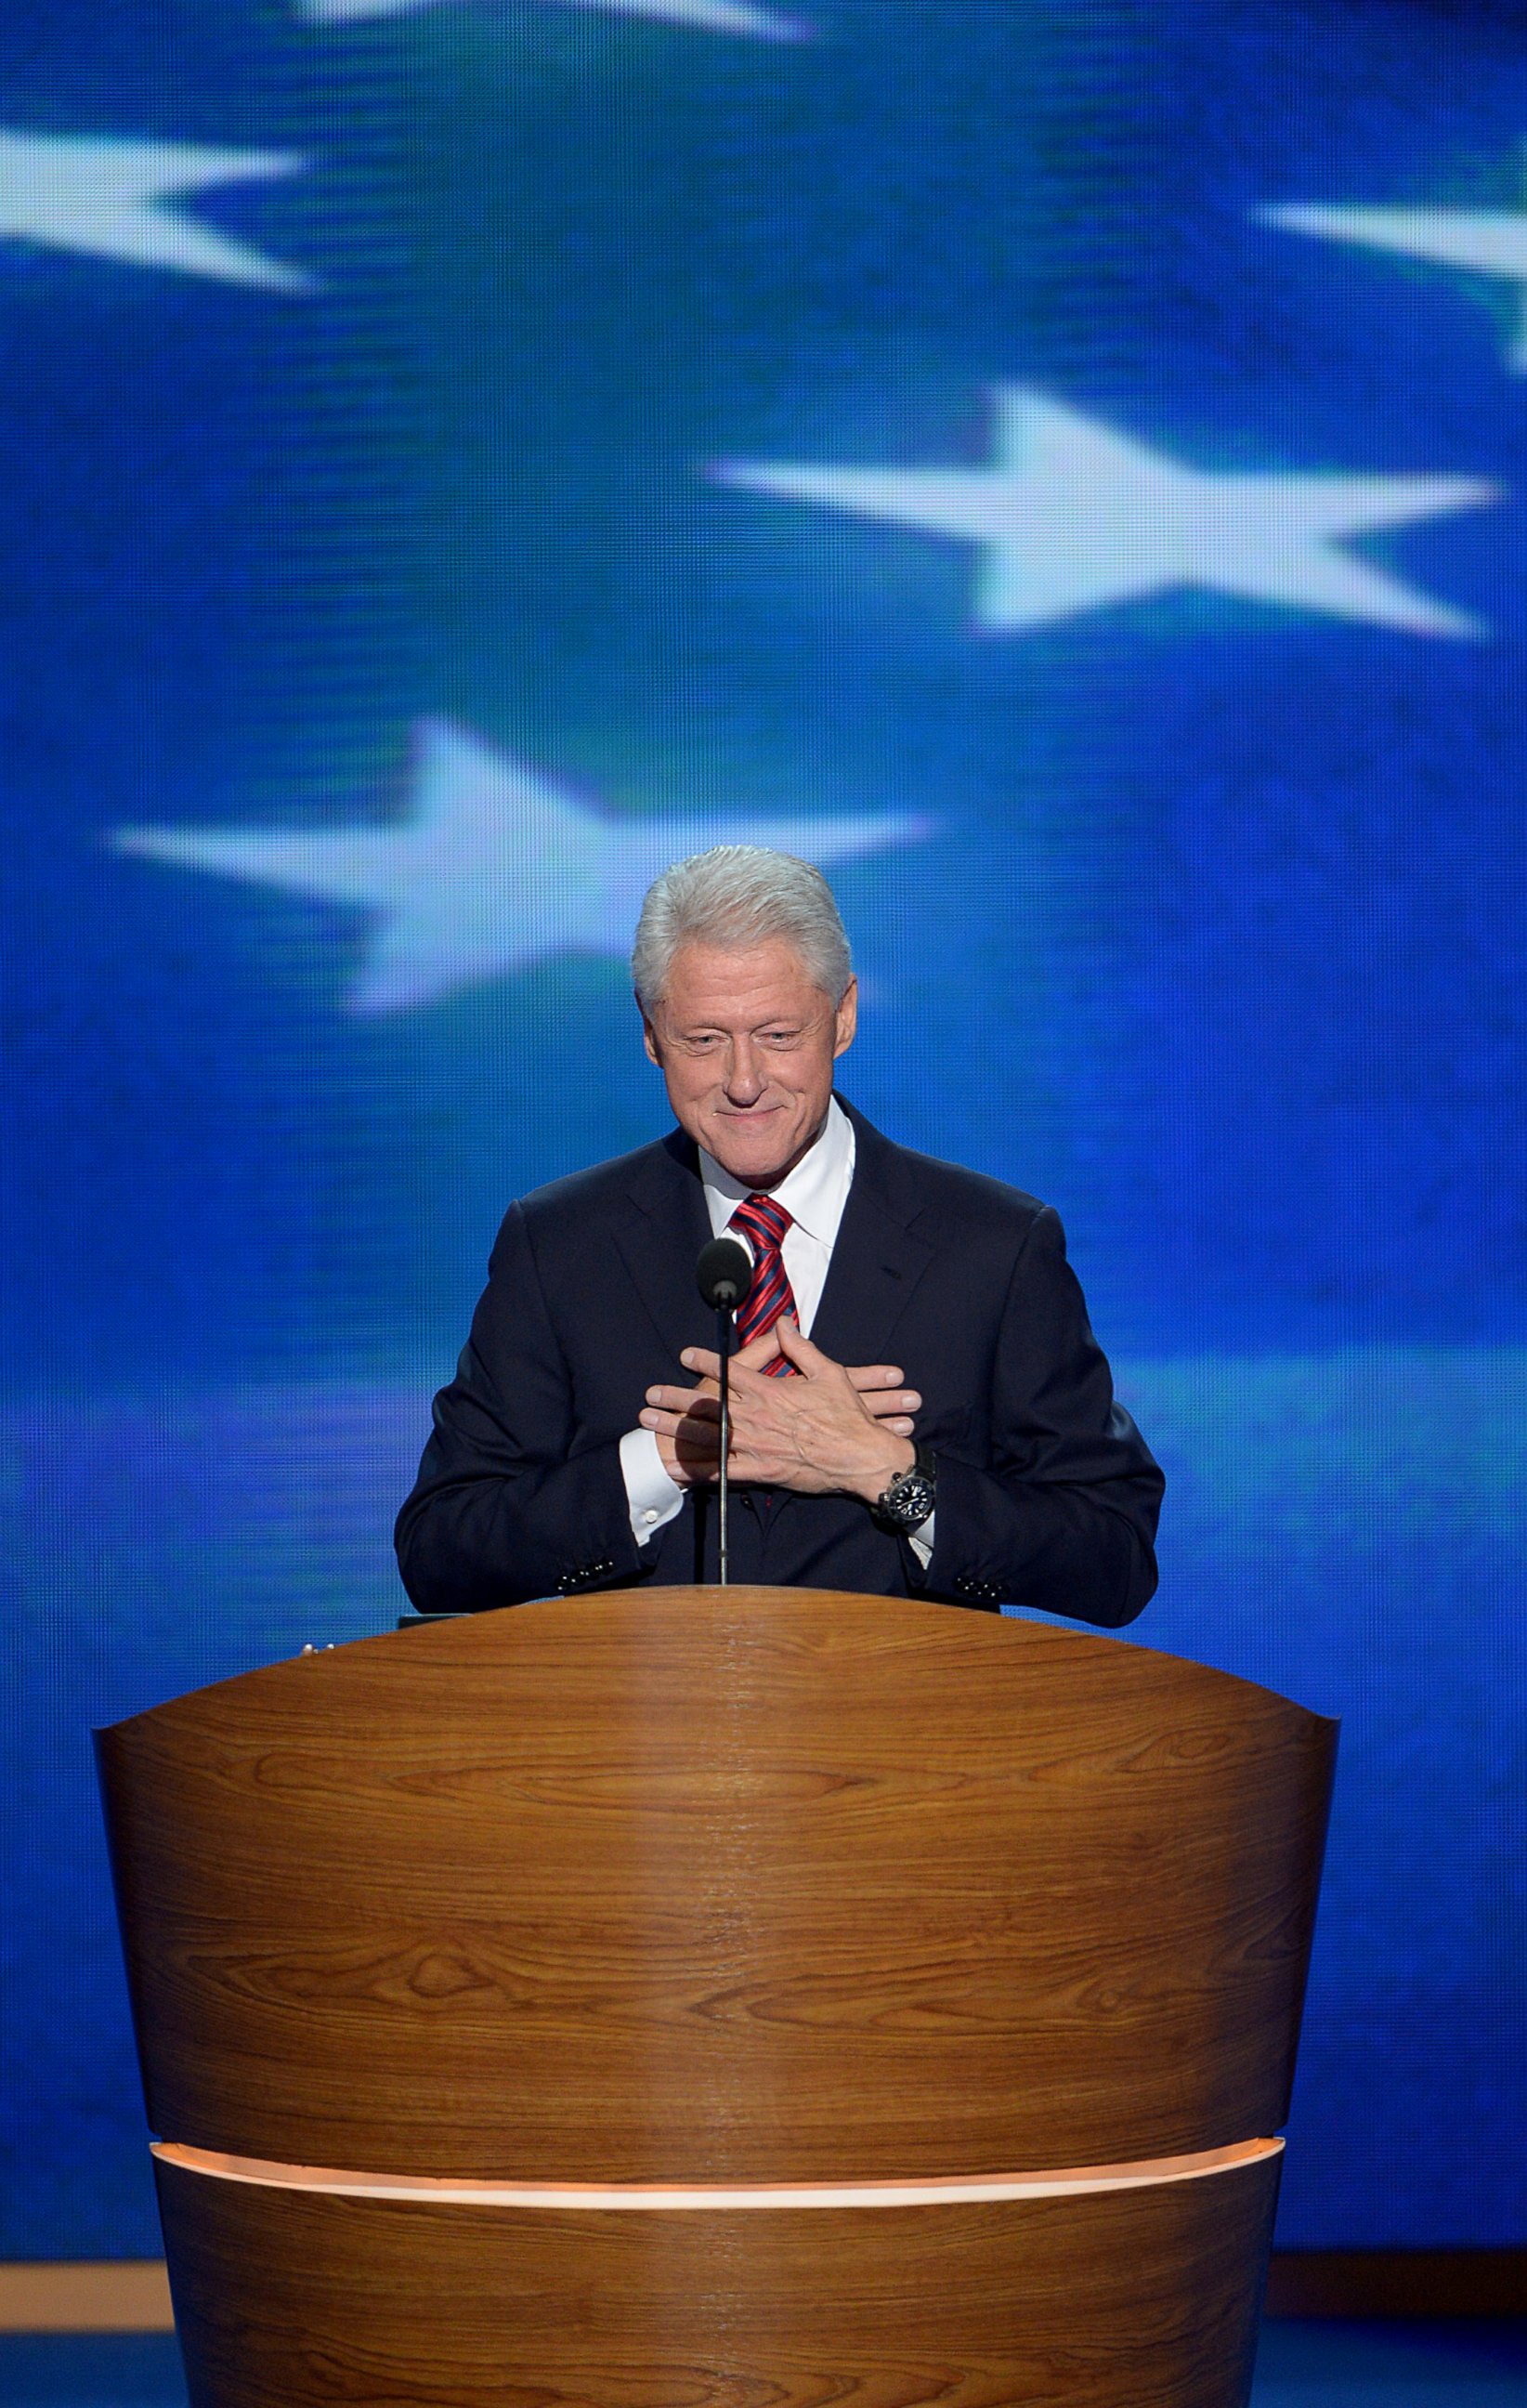 PHOTO: Former president Bill Clinton during the 2012 Democratic National Convention at the Time Warner Center on Sept. 5, 2012 in Charlotte, N.C. 